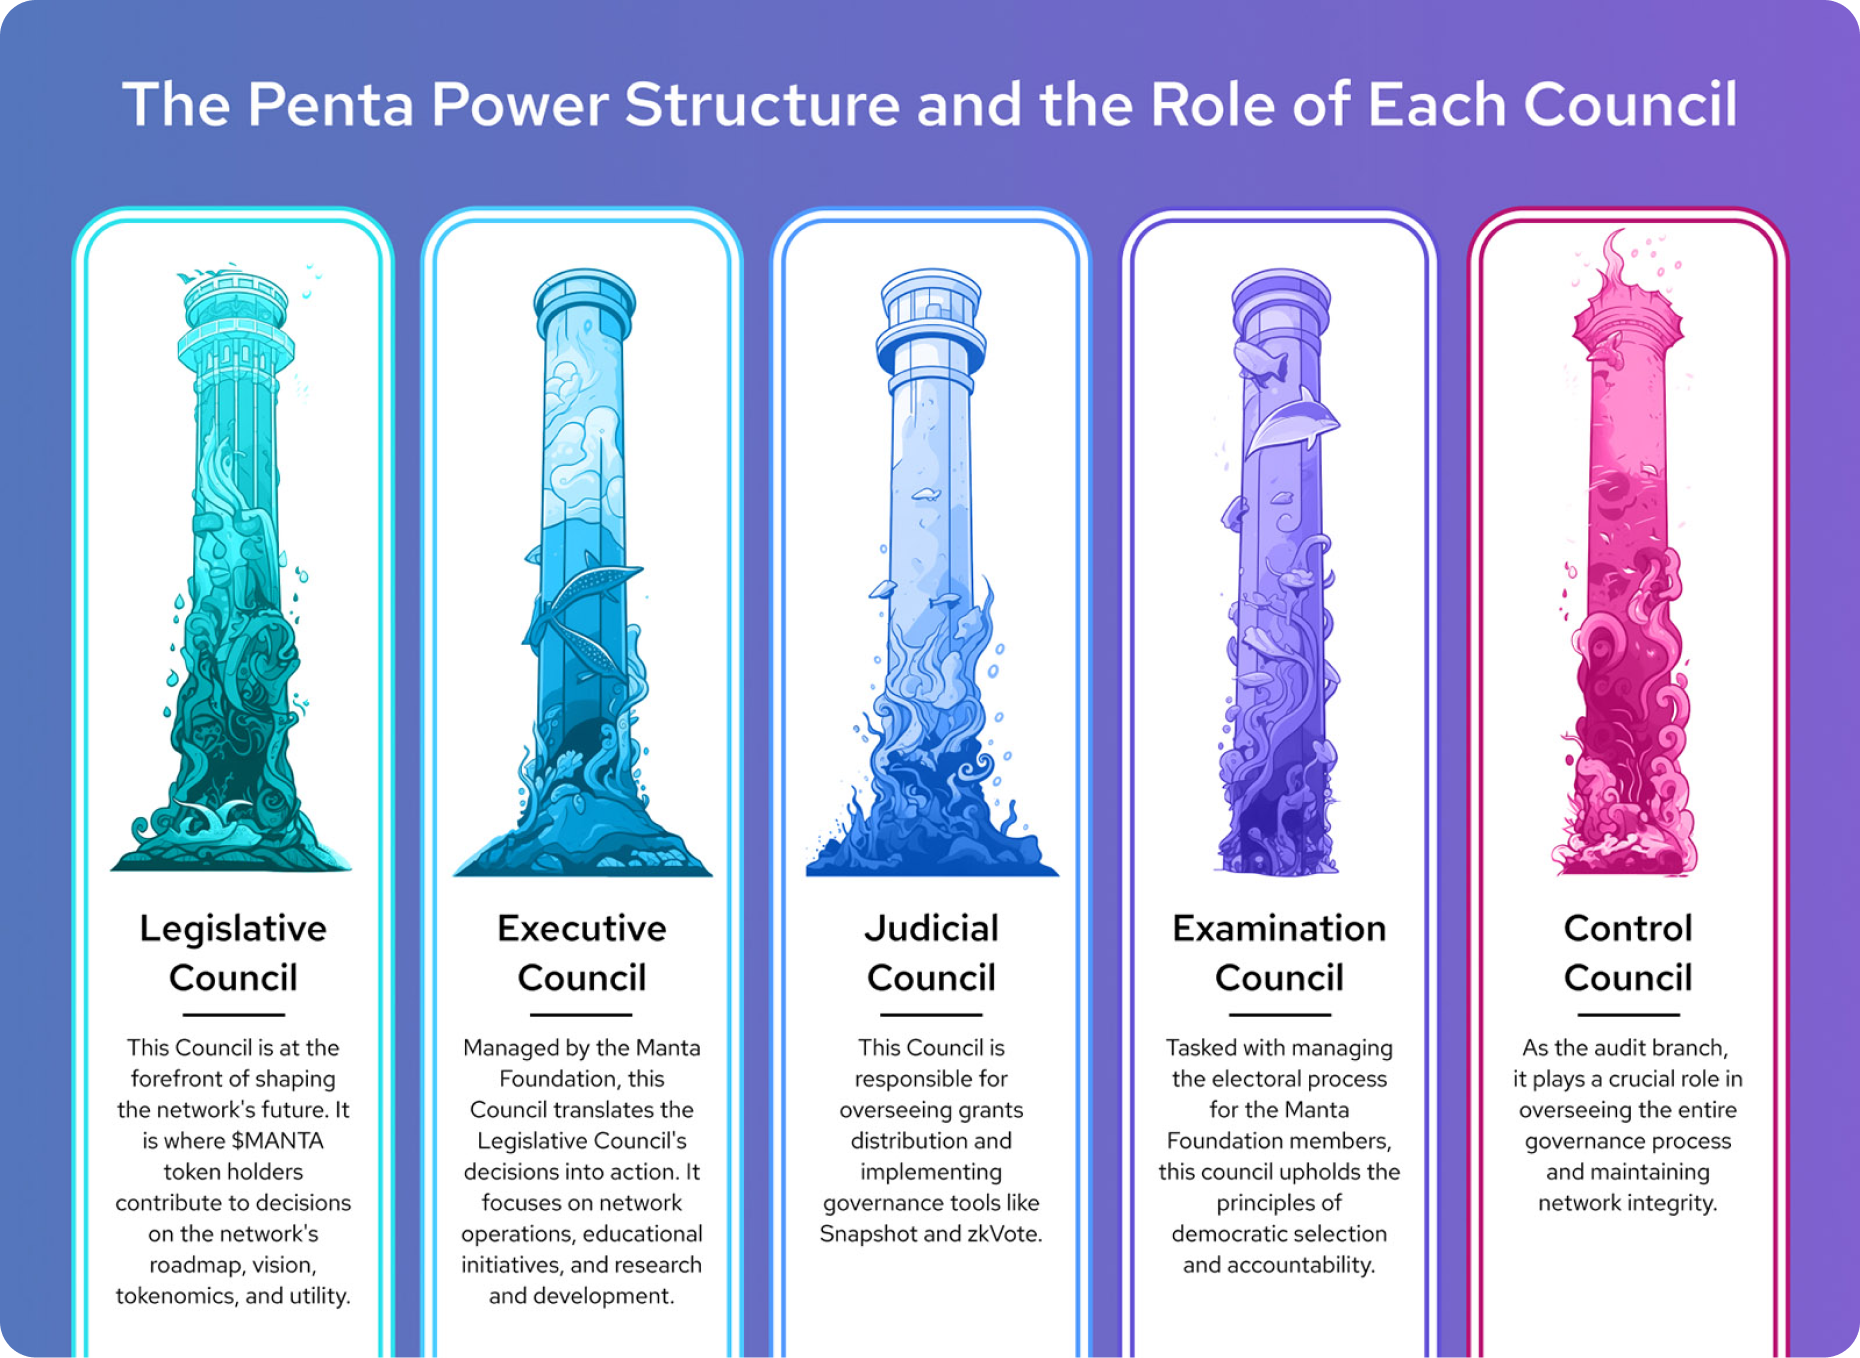 The Penta Power Structure